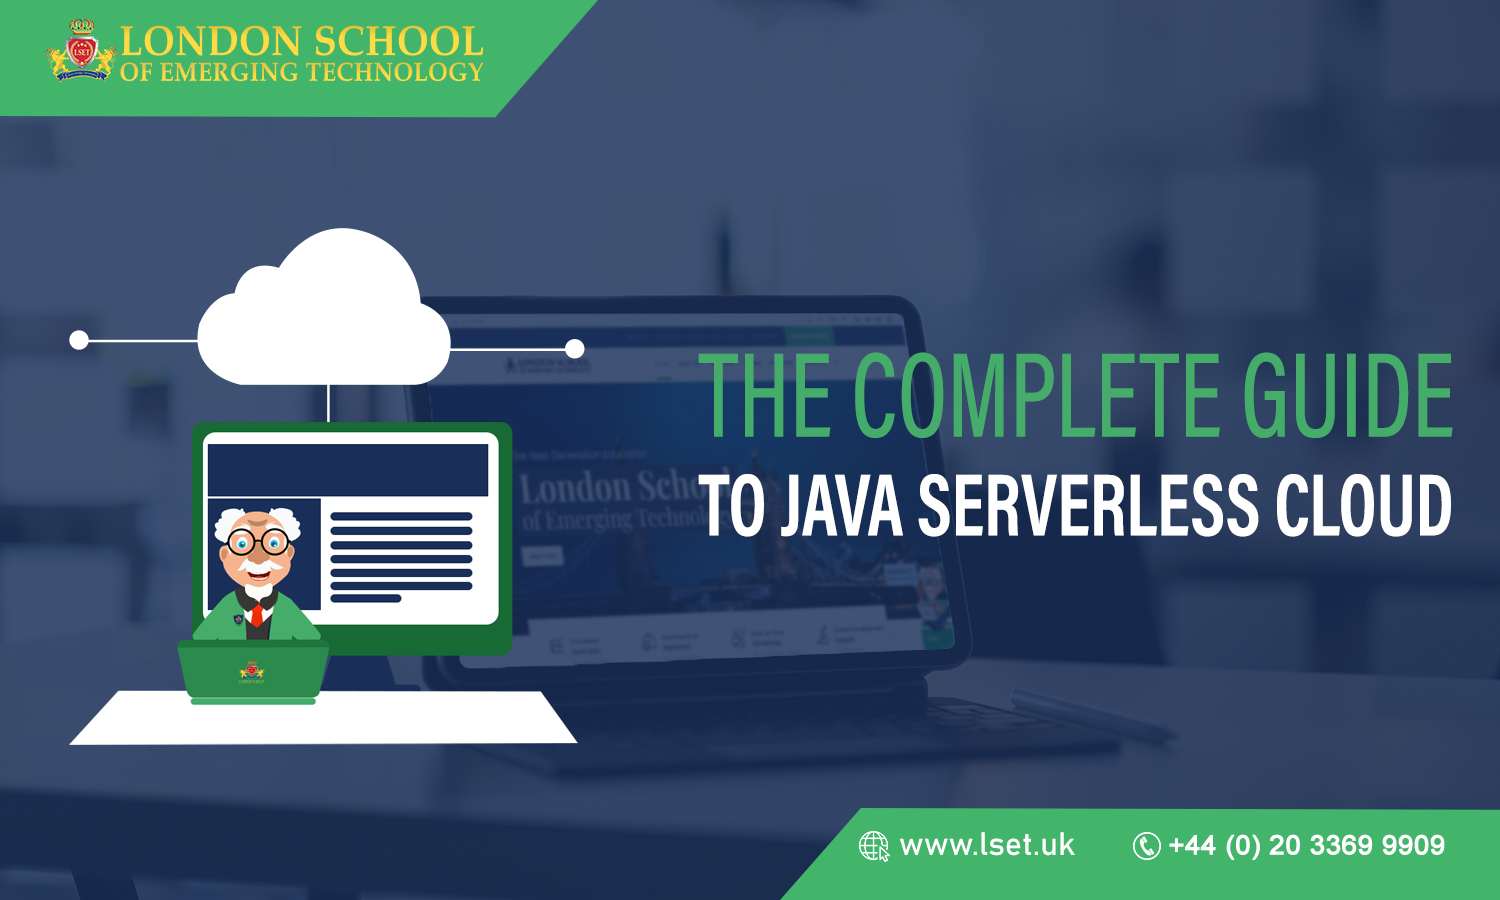 The Complete Guide to Java Serverless Cloud